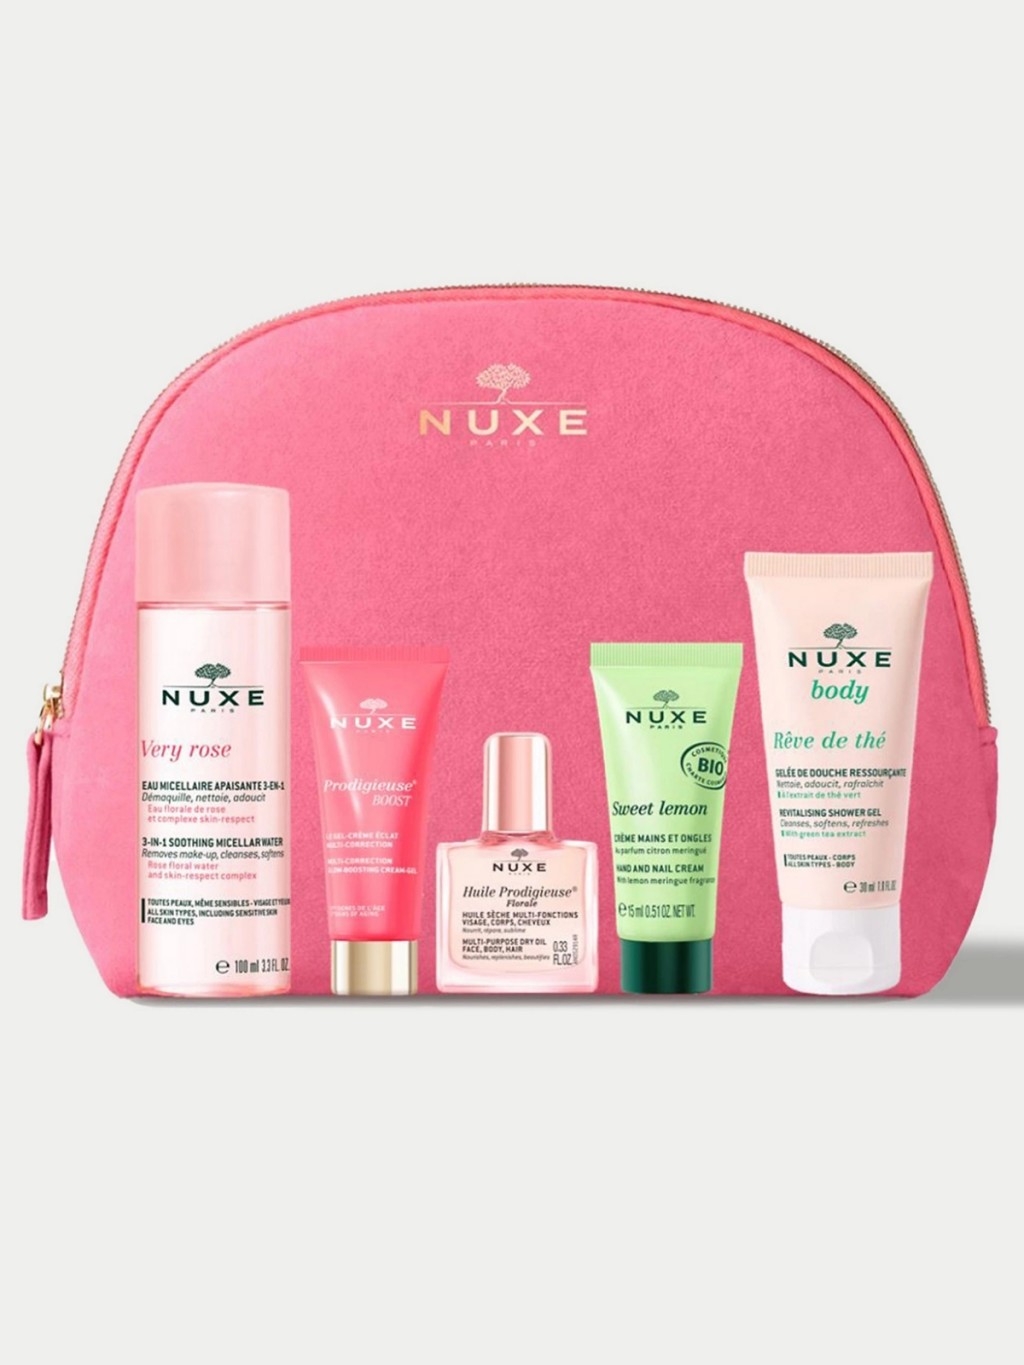 Buy two nuxe products and receive a free gift. Shop nuxe